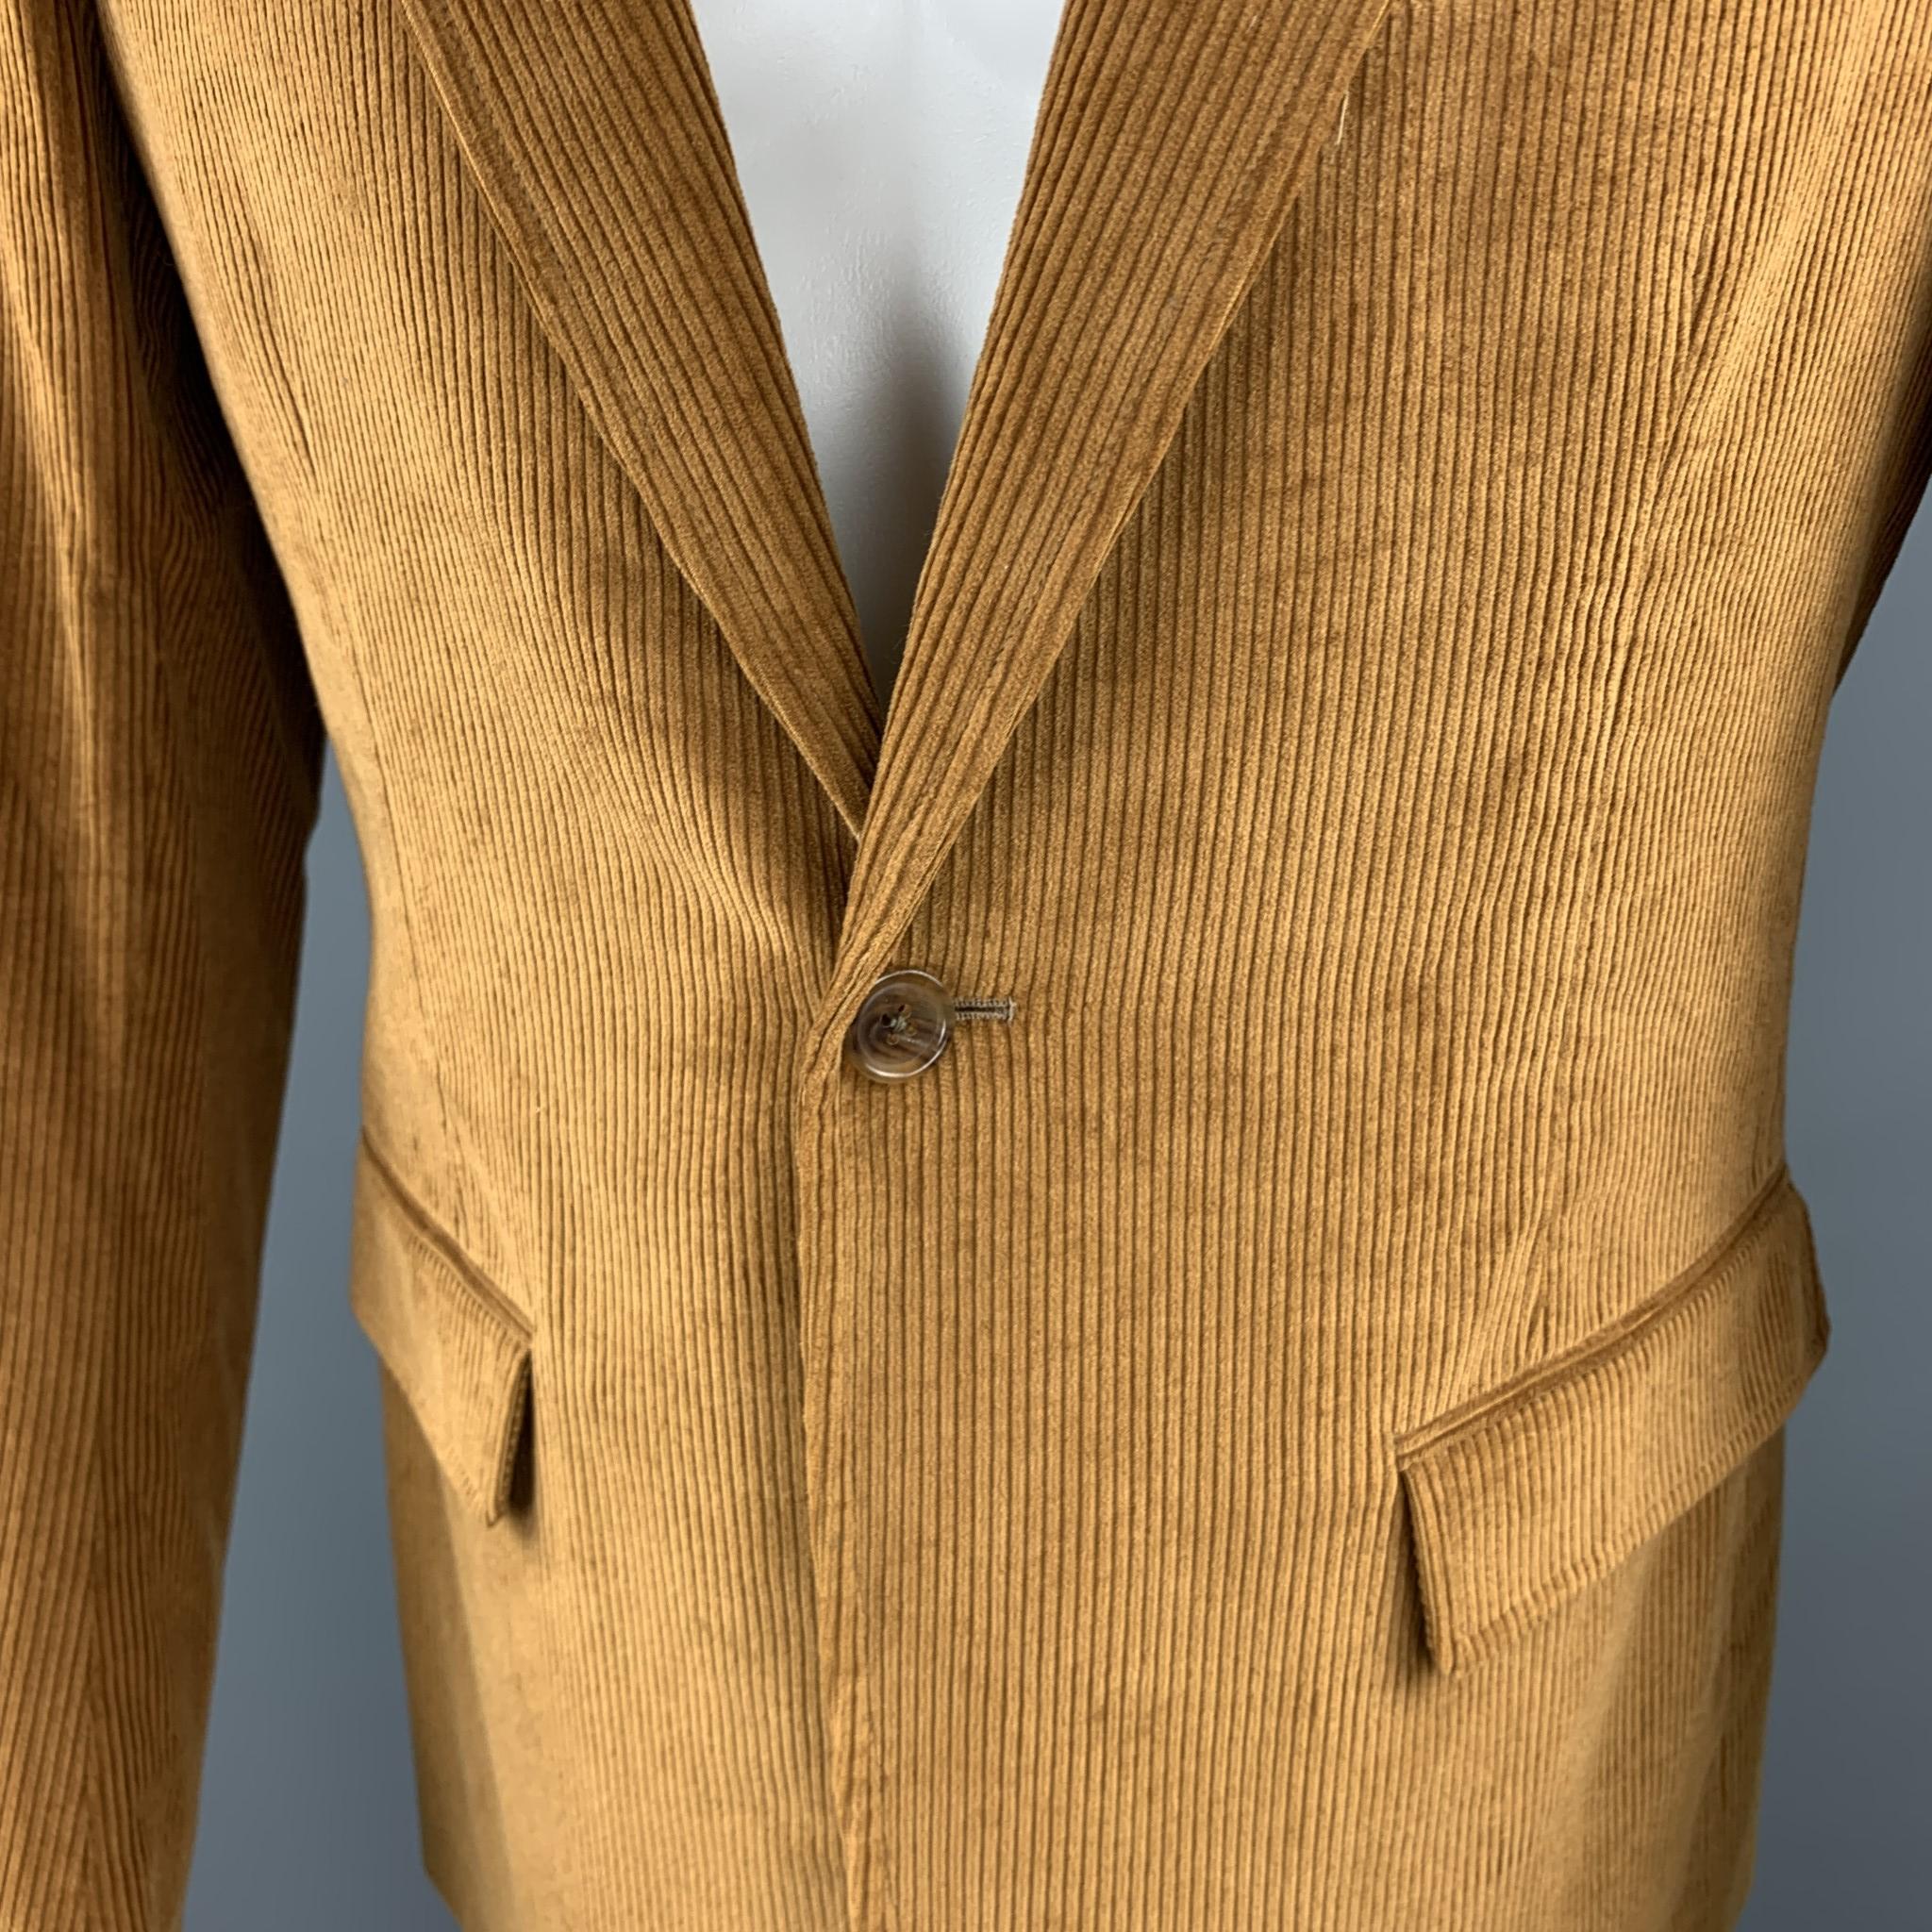 BAND OF OUTSIDERS sport coat comes in tan corduroy with a peak lapel, single breasted, one button front, and double vented back. Made in USA.

Excellent Pre-Owned Condition. 
Marked: JP 3

Measurements:

Shoulder: 17 in.
Chest: 40 in.
Sleeve: 25.5